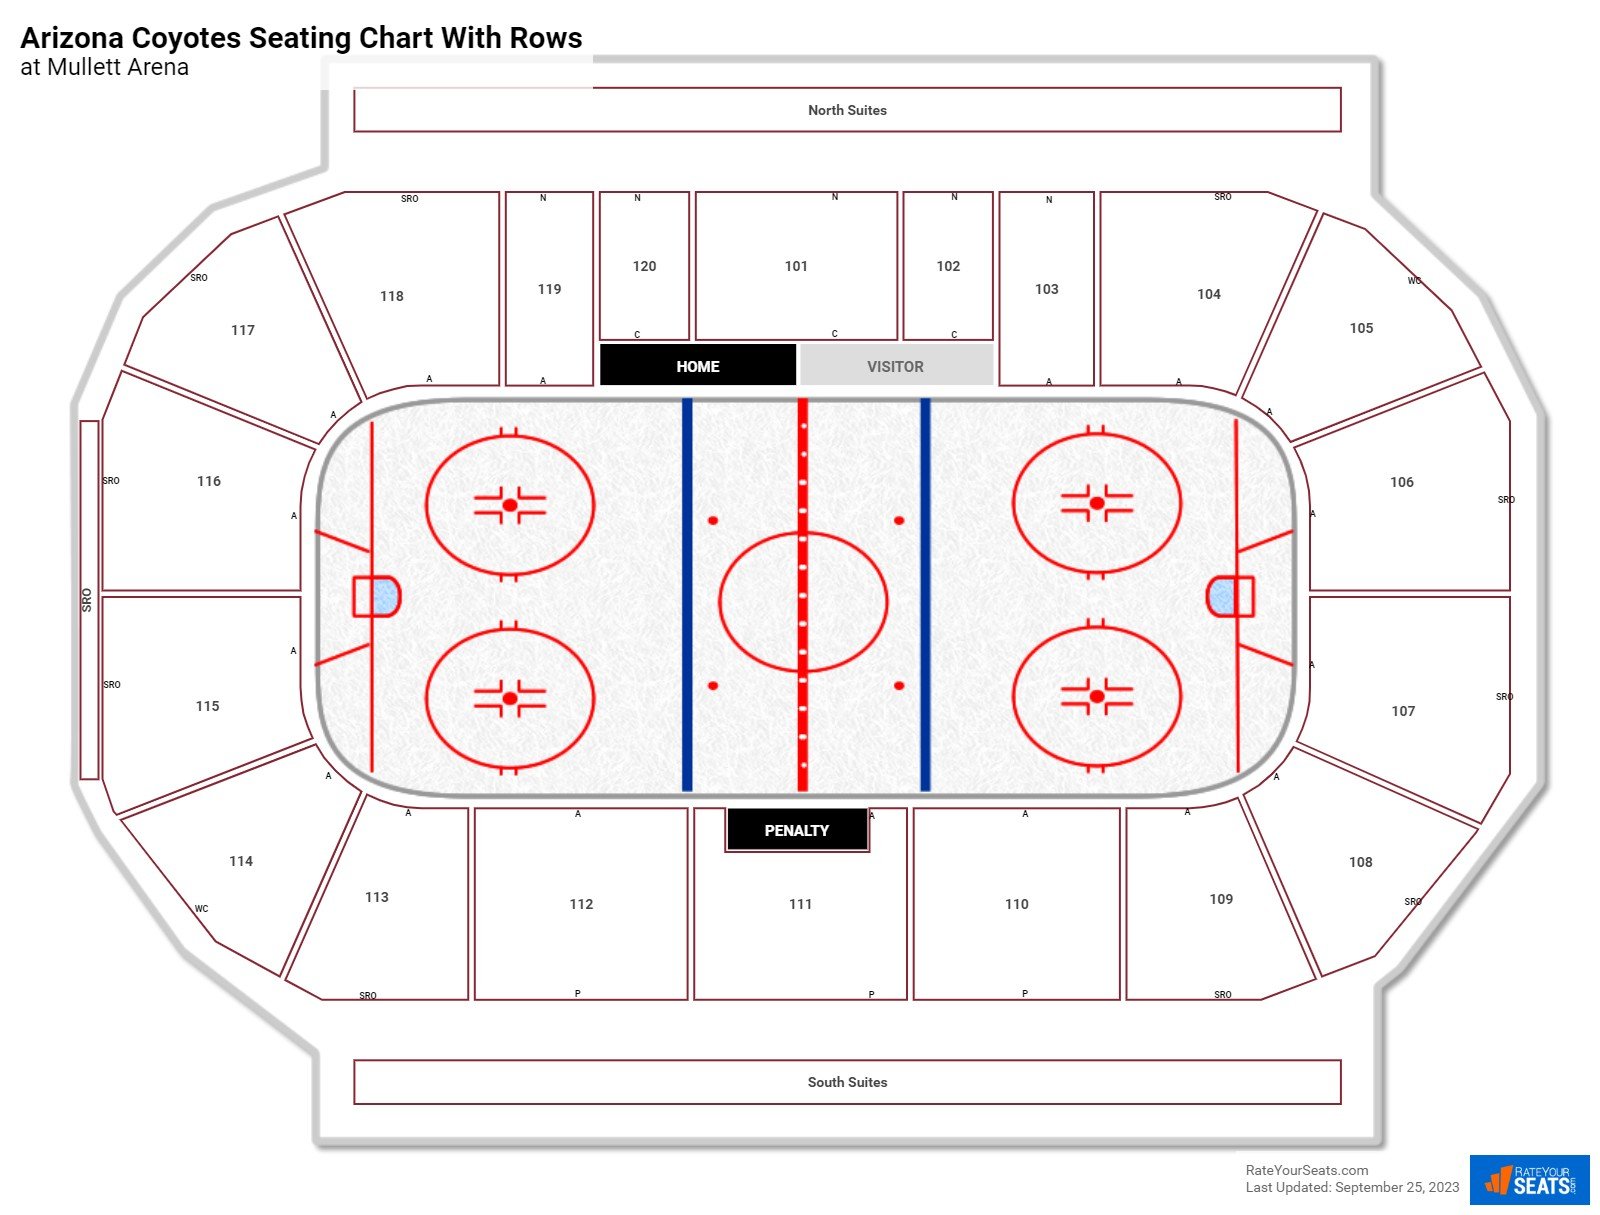 Mullett Arena seating chart with row numbers